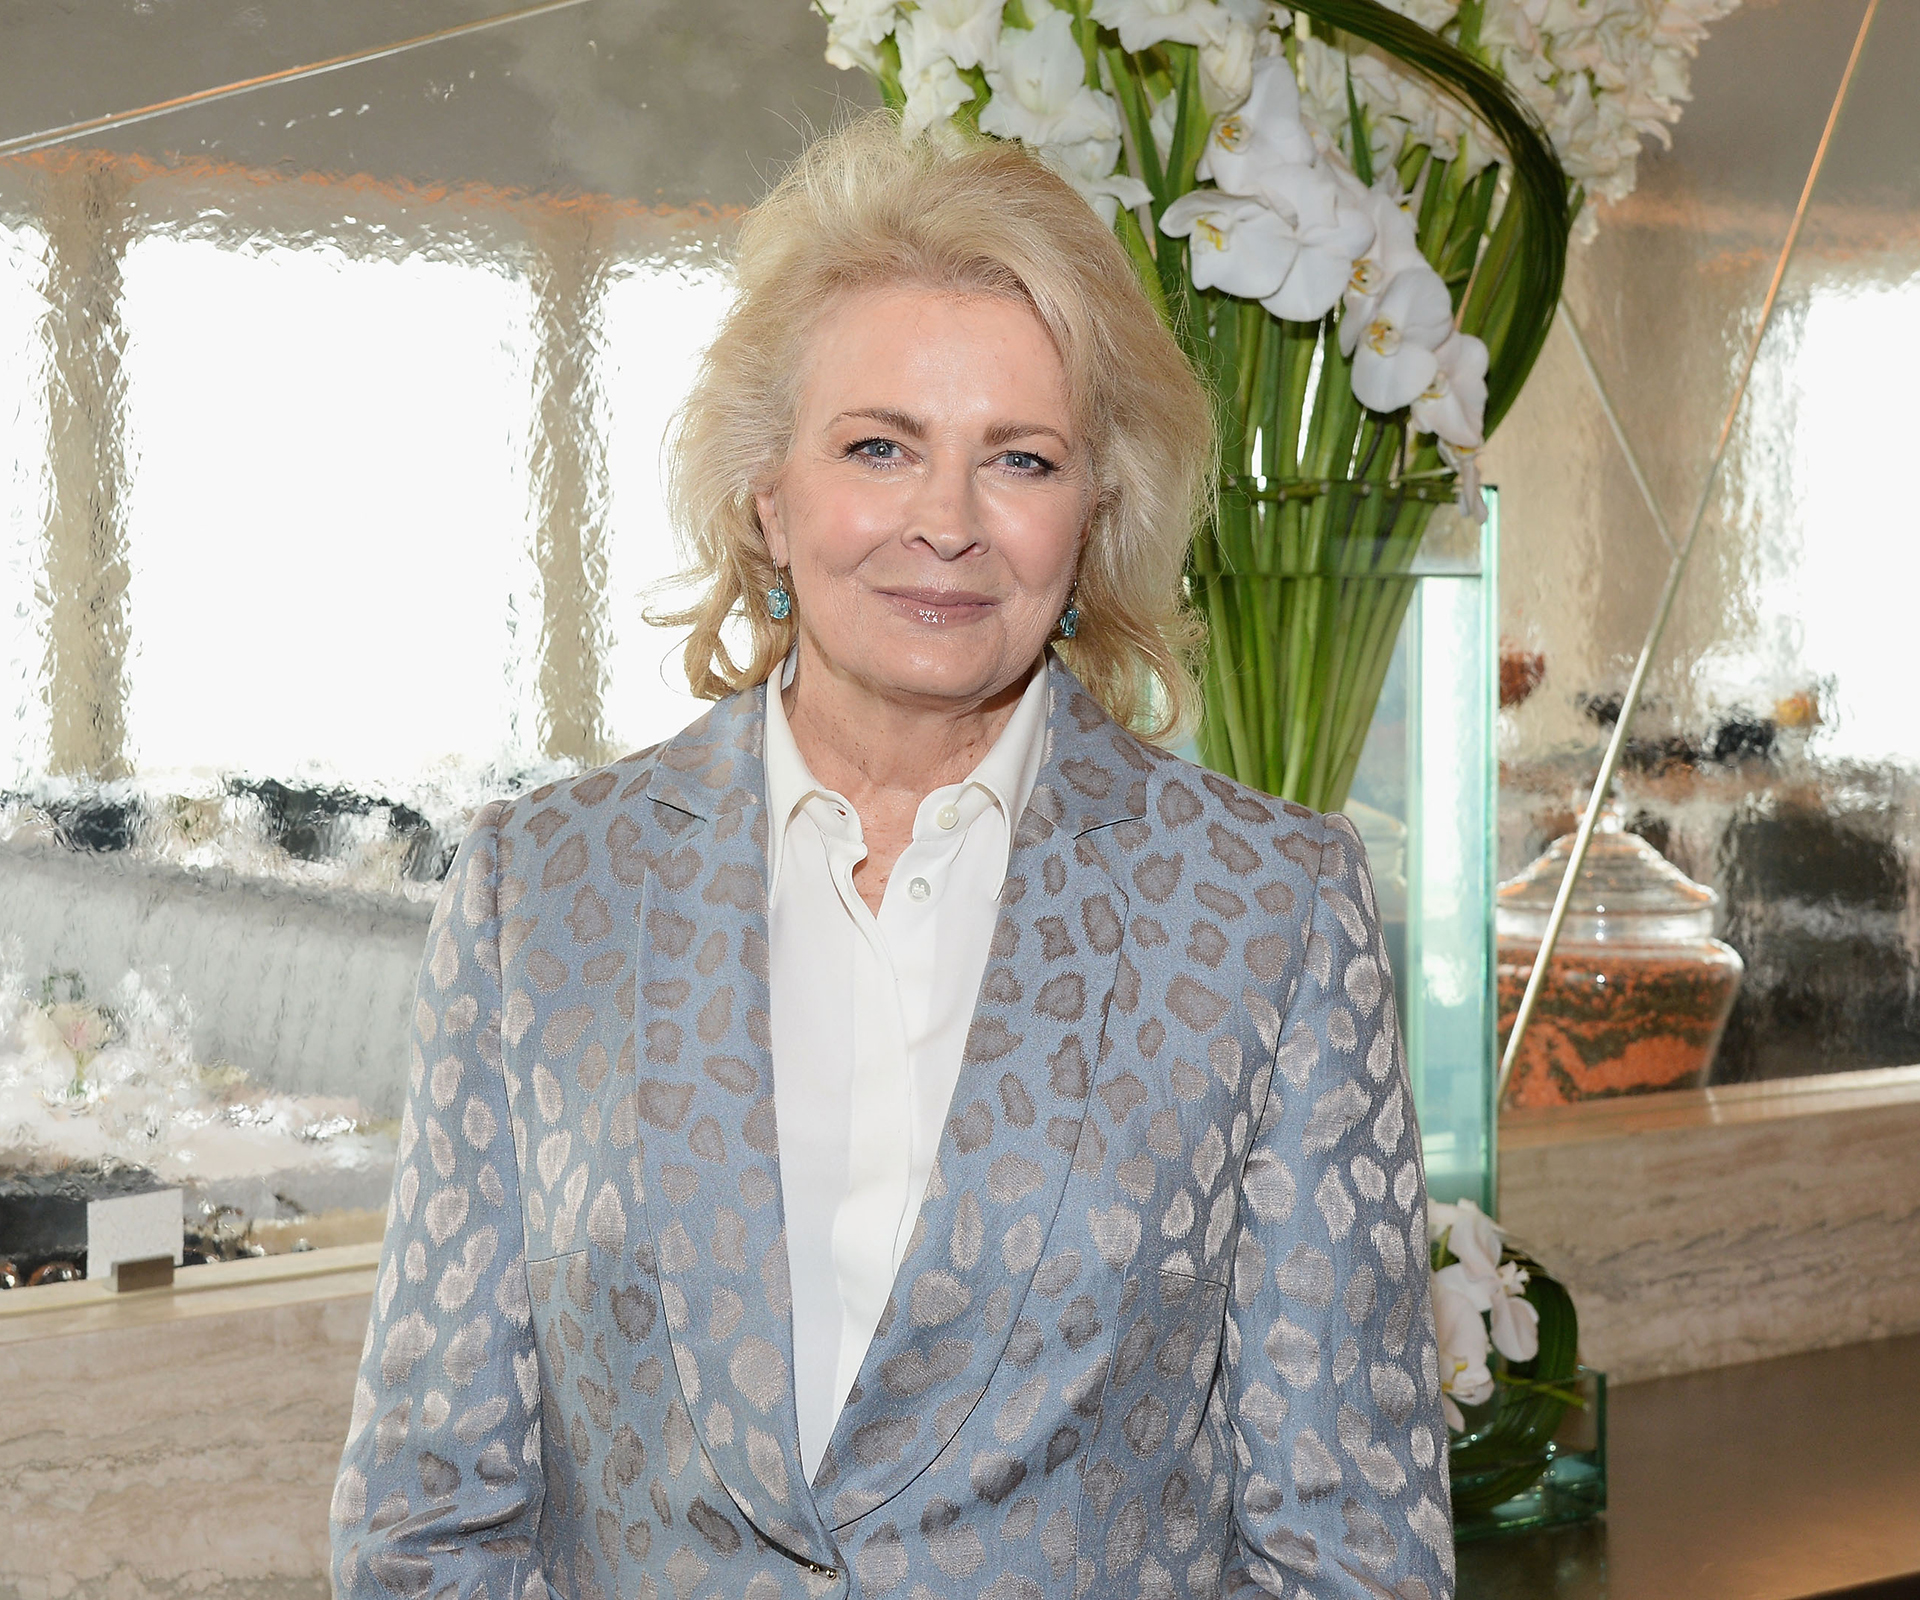 Feminist trailblazer Candice Bergen at 69: “People still say thank you for Murphy Brown”